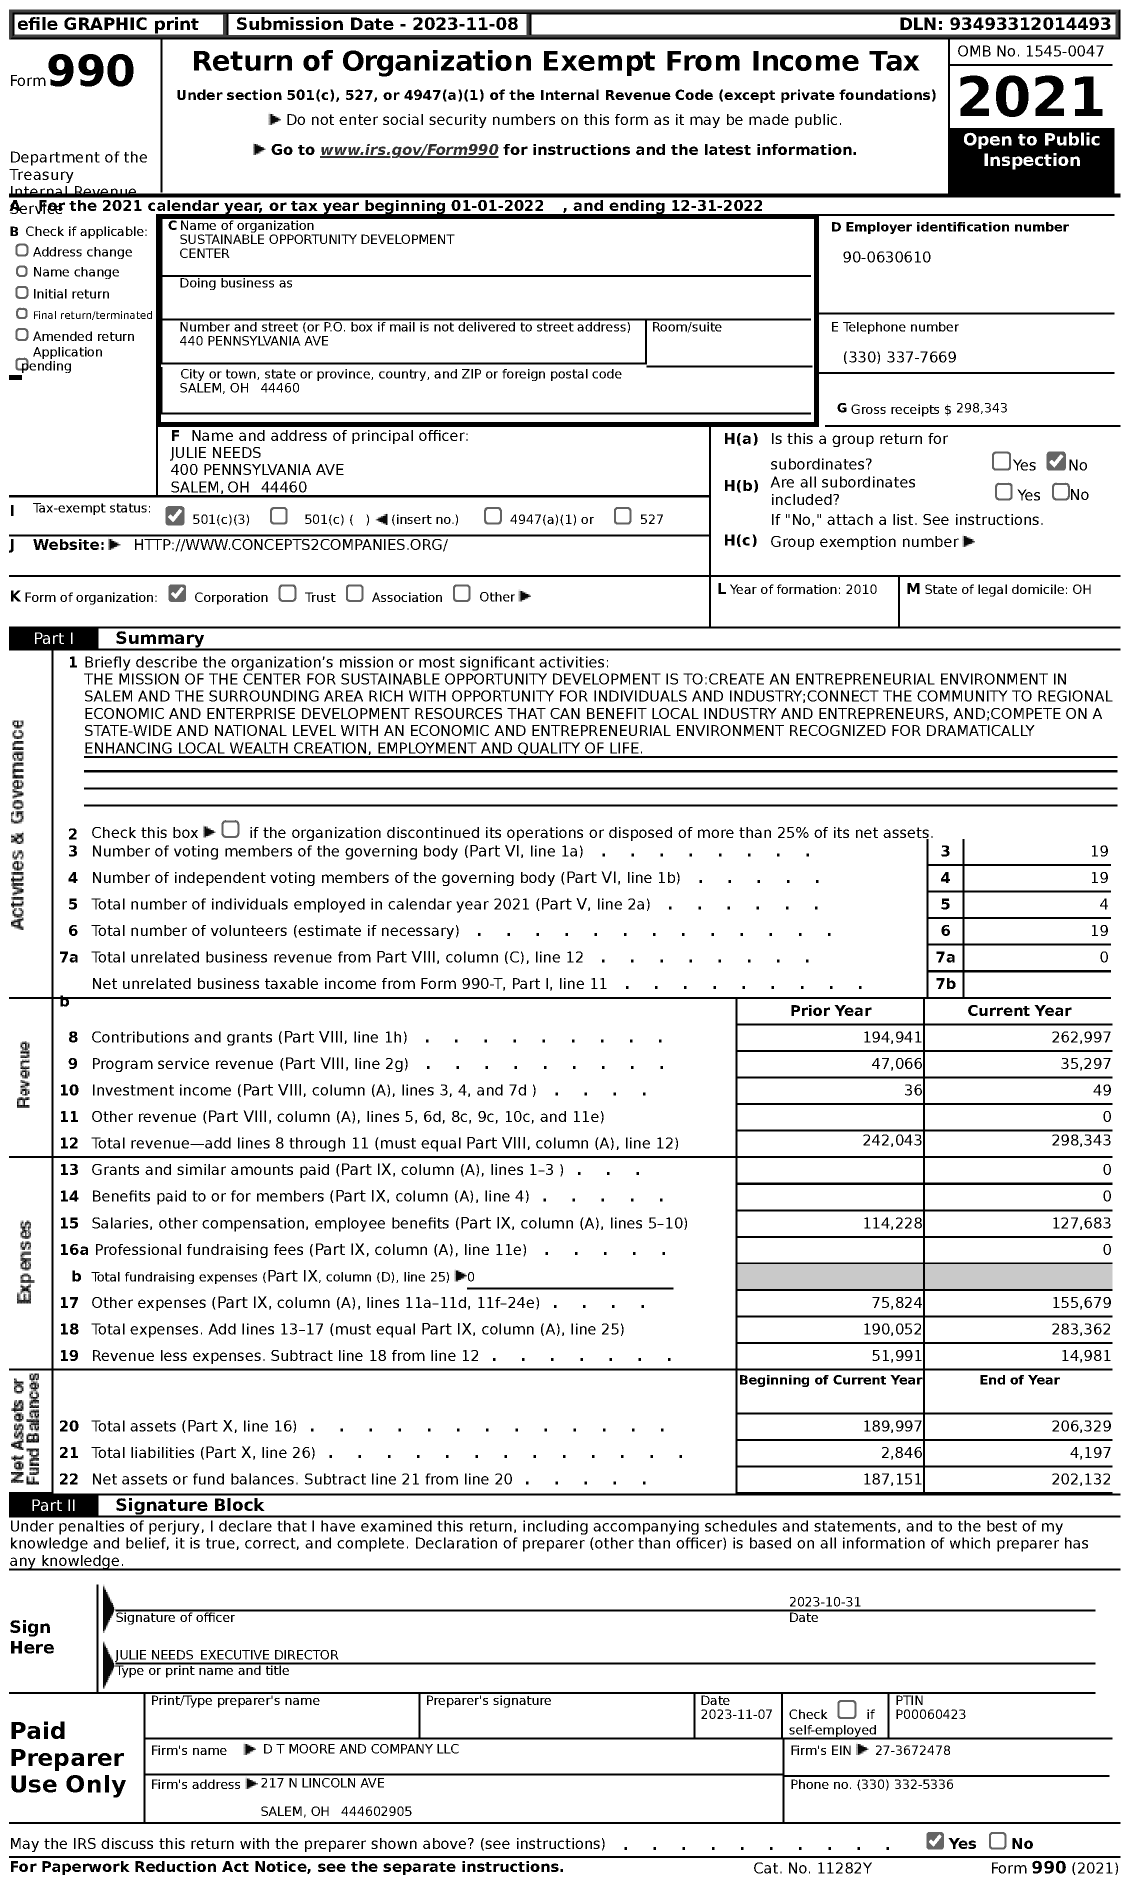 Image of first page of 2022 Form 990 for Sustainable Opportunity Development Center